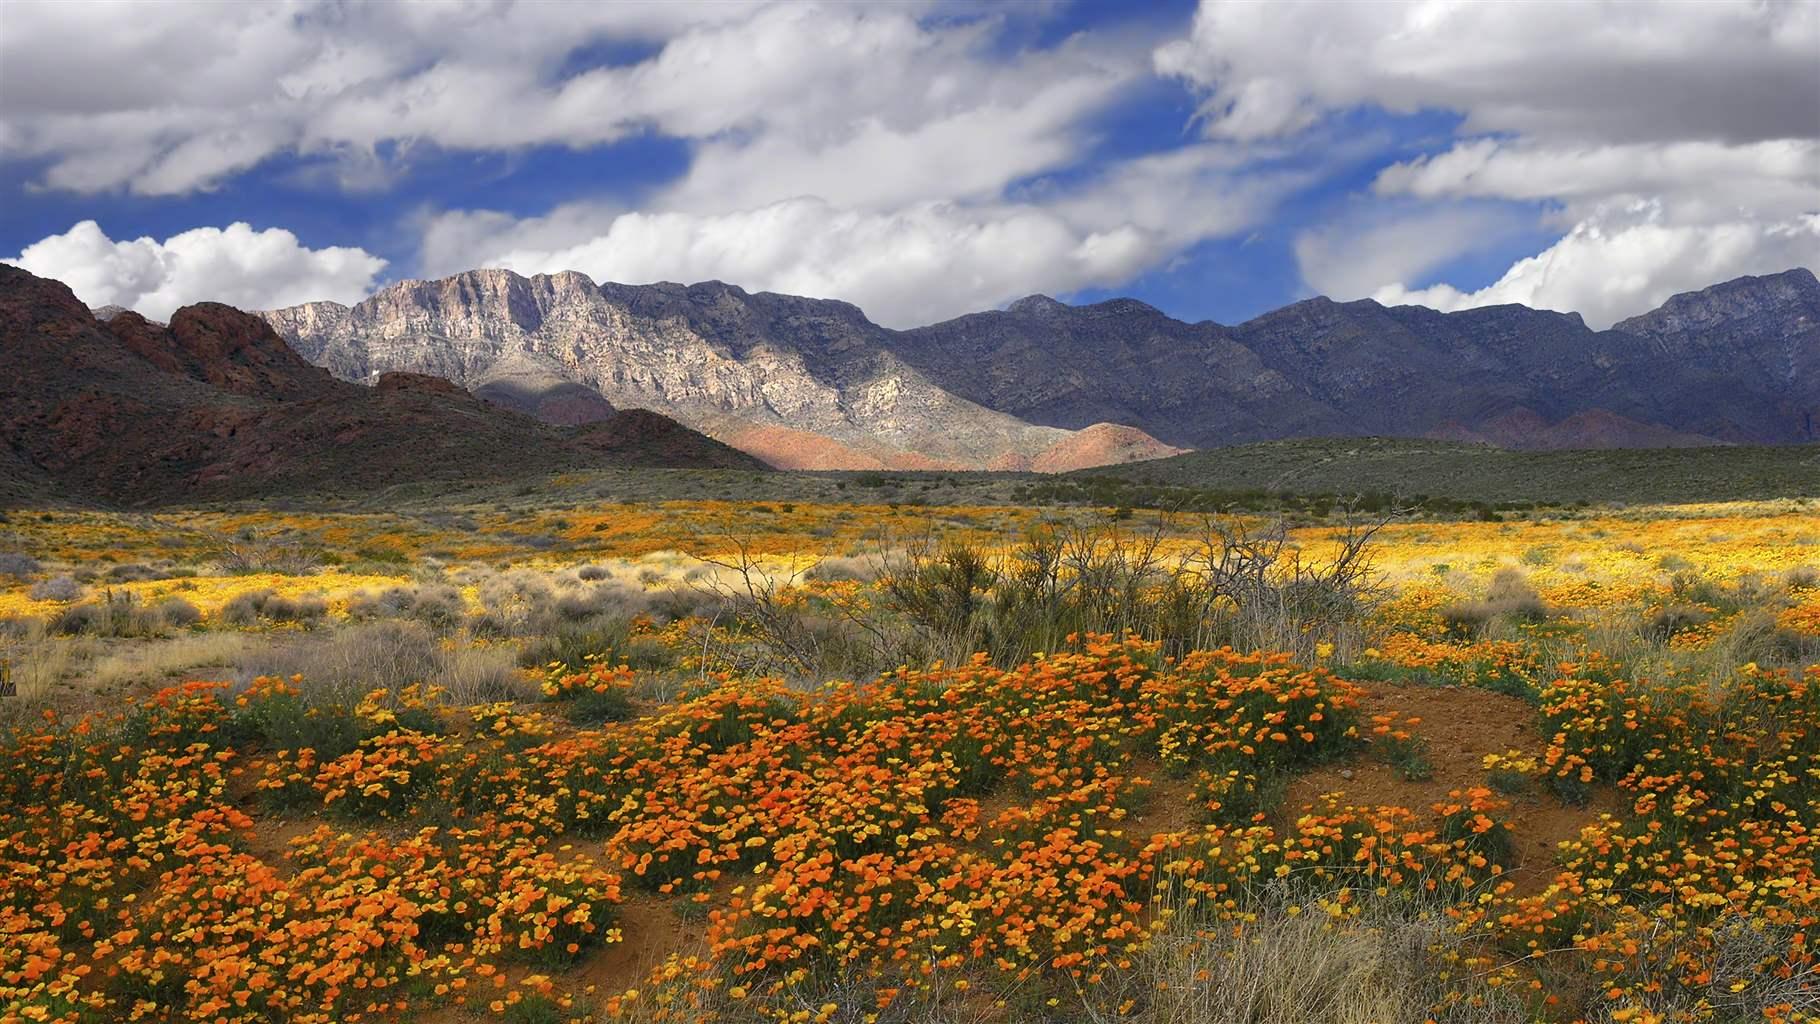 Mexican gold poppies bloom in the Castner Range area of the Franklin Mountains outside El Paso, Texas. 